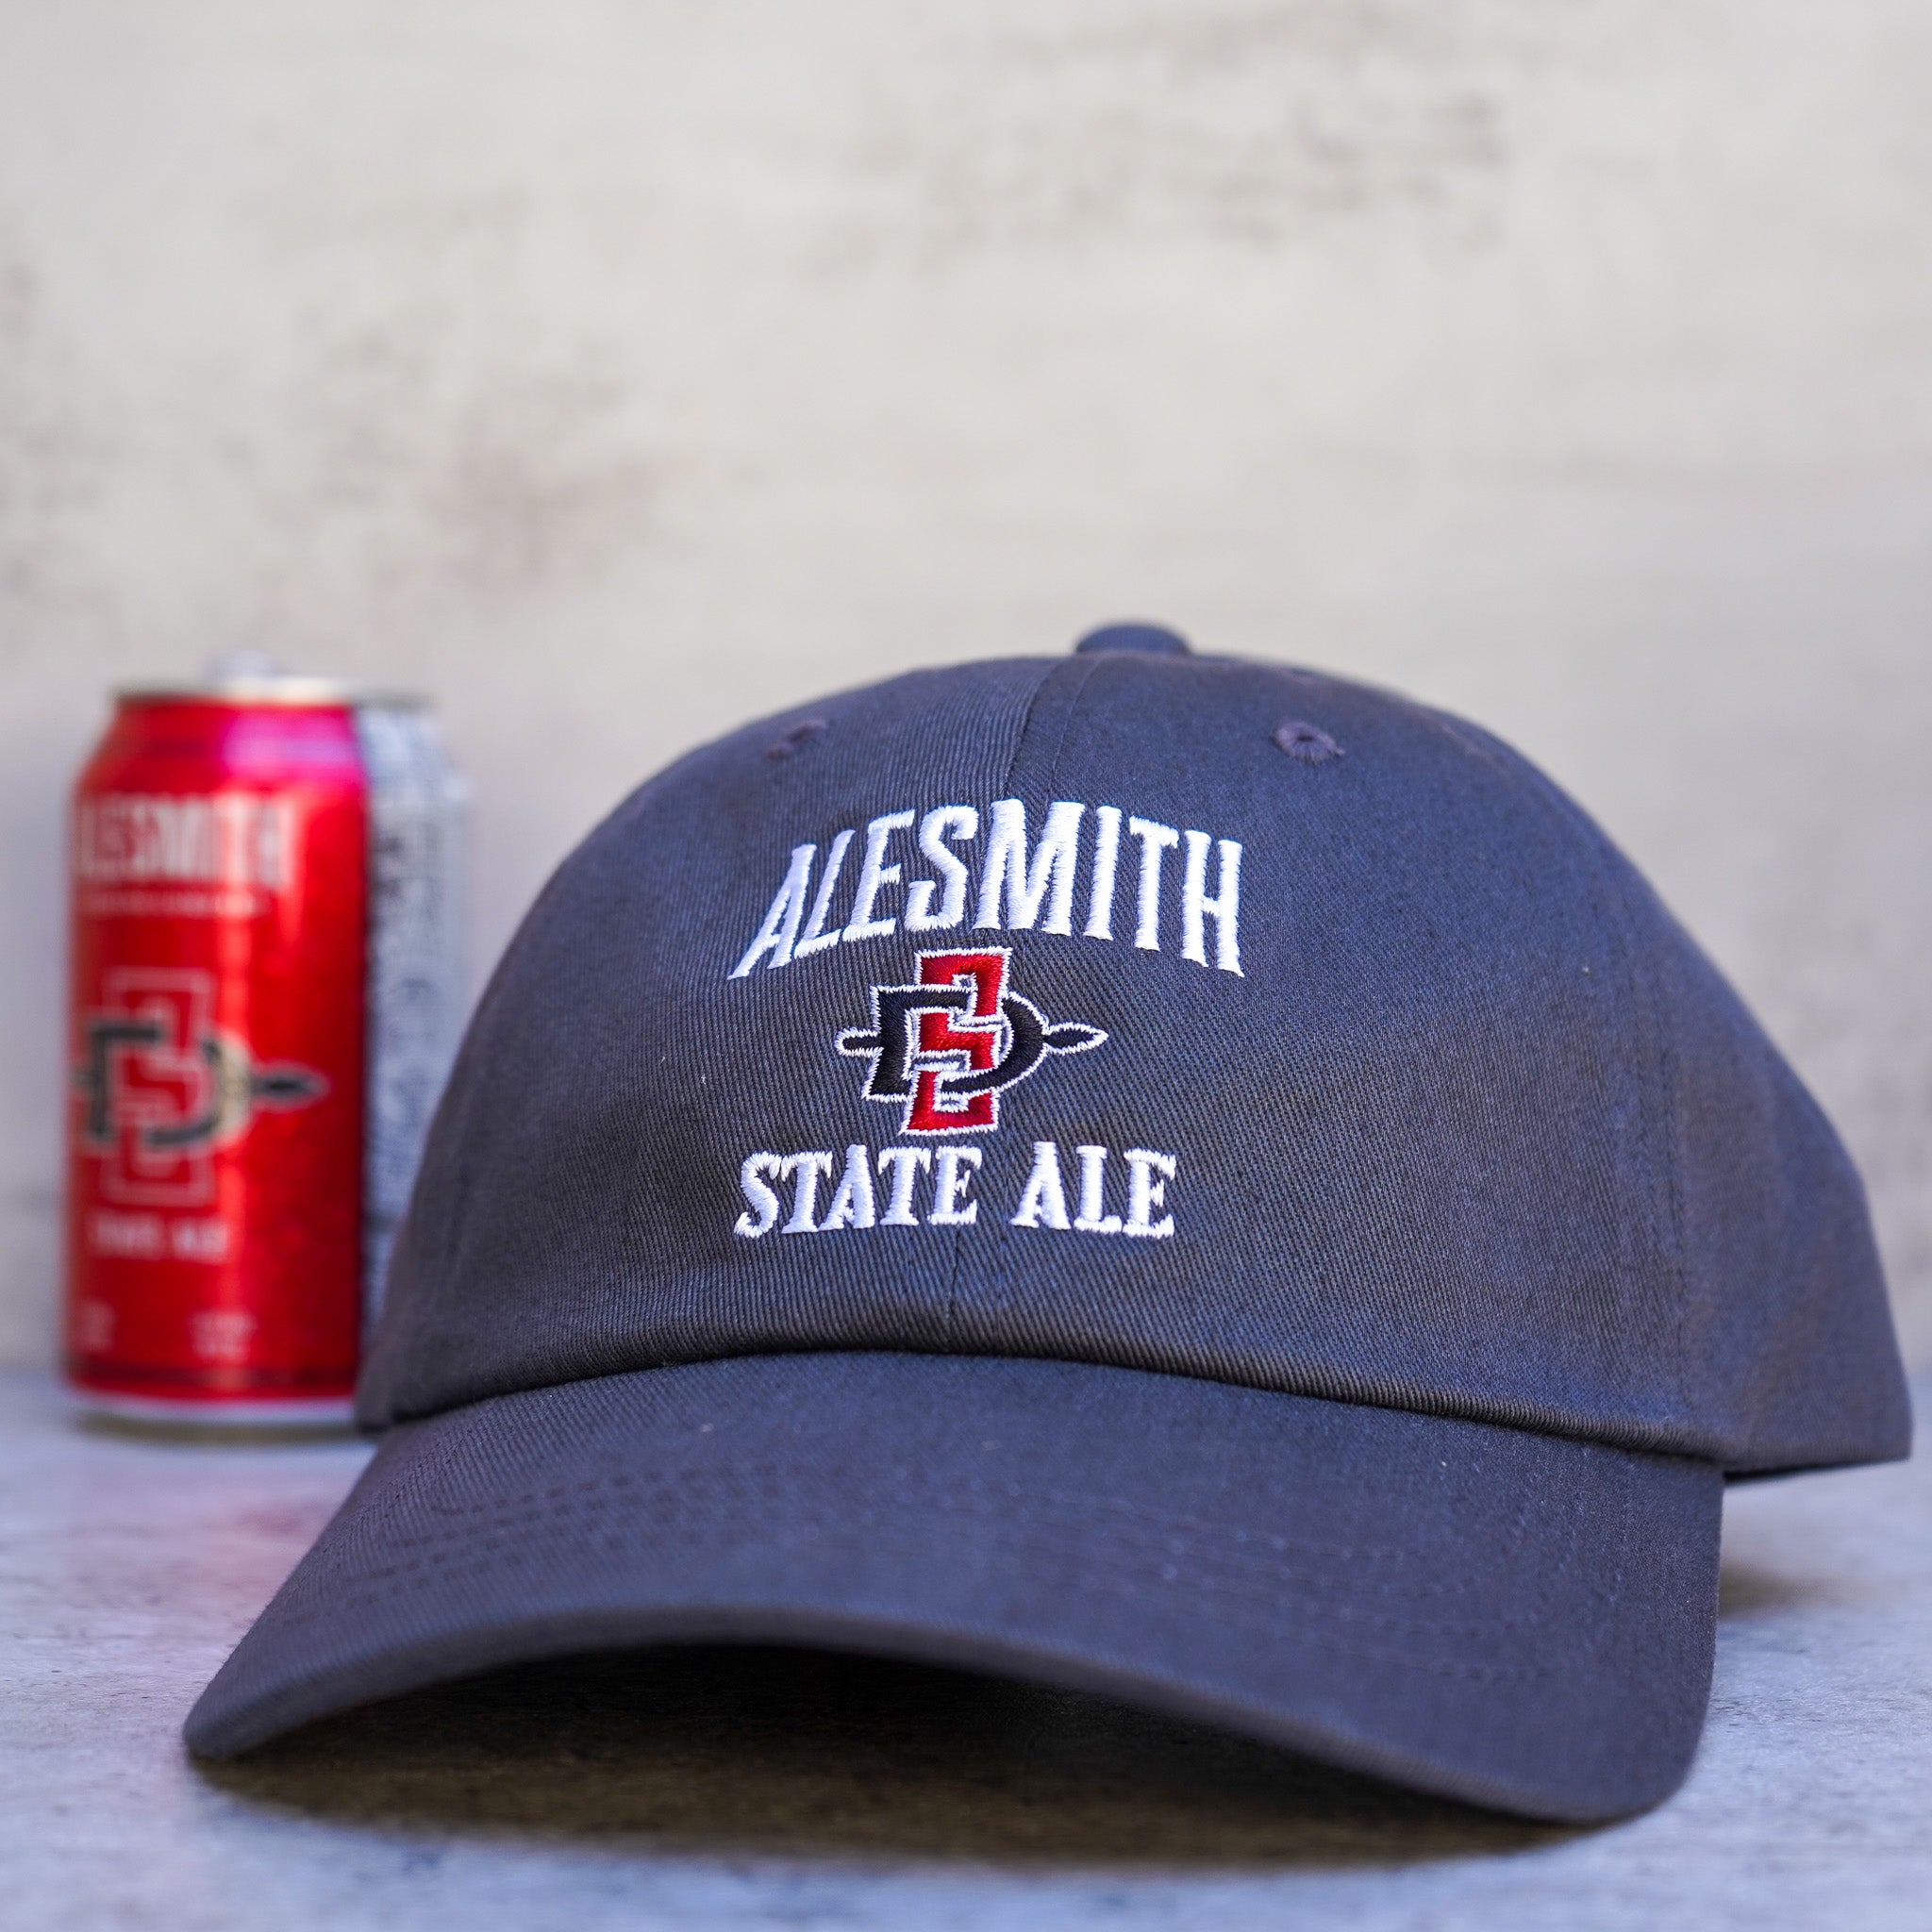 State Ale Dad Hat v2 - AleSmith Brewing Co.